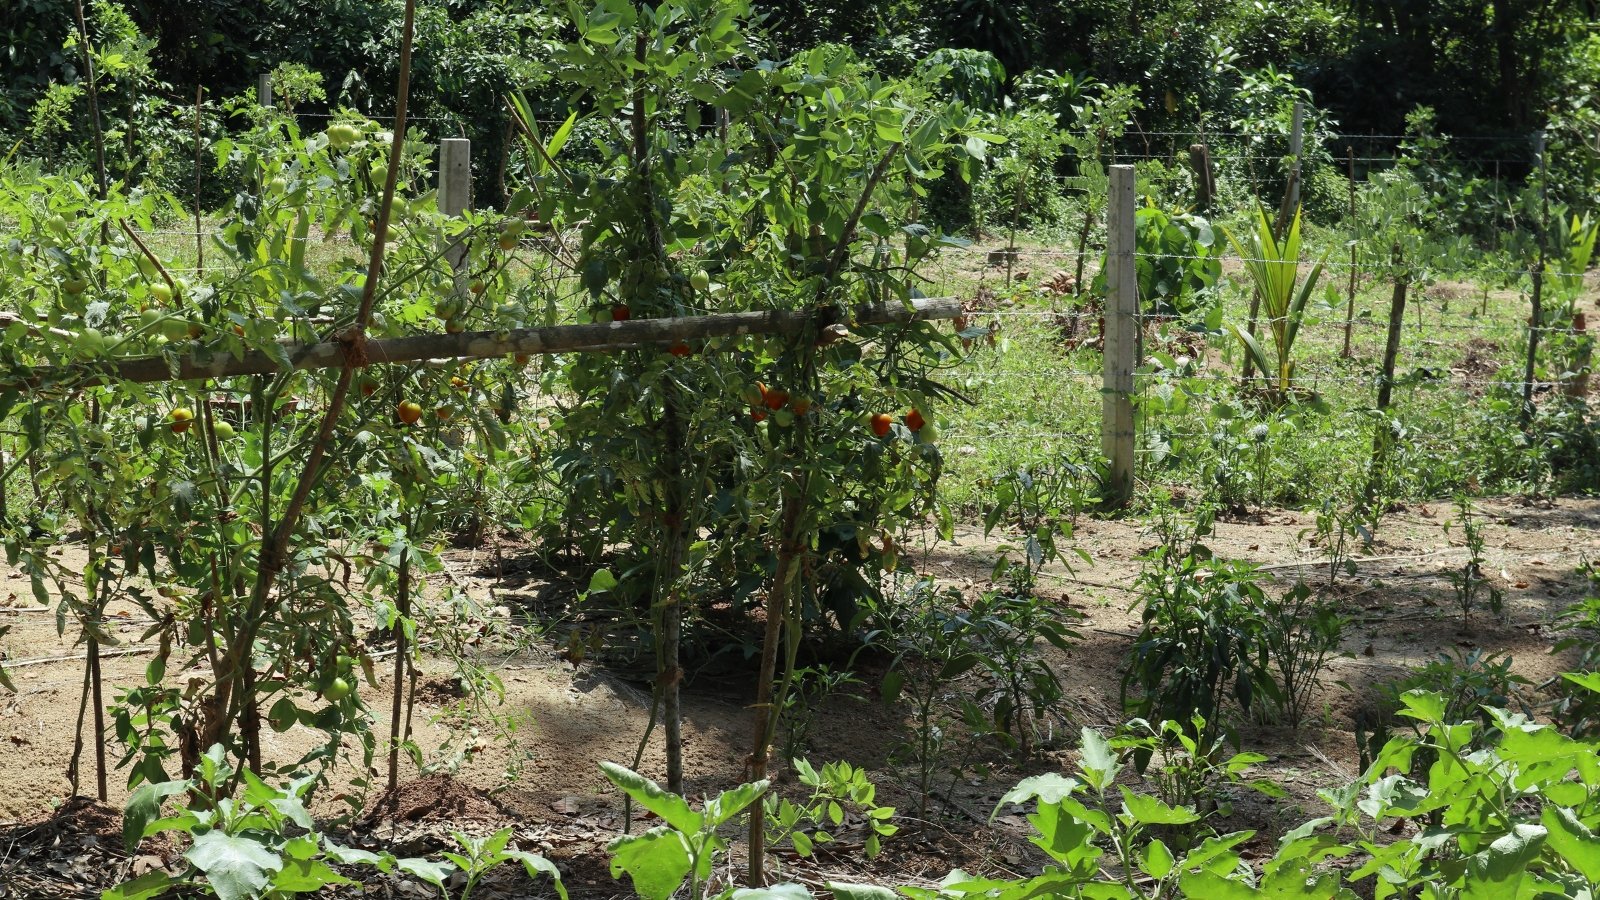 A tomato vine displays a sparse harvest of red fruits, hinting at the promise of future bounty amid the lush green foliage.